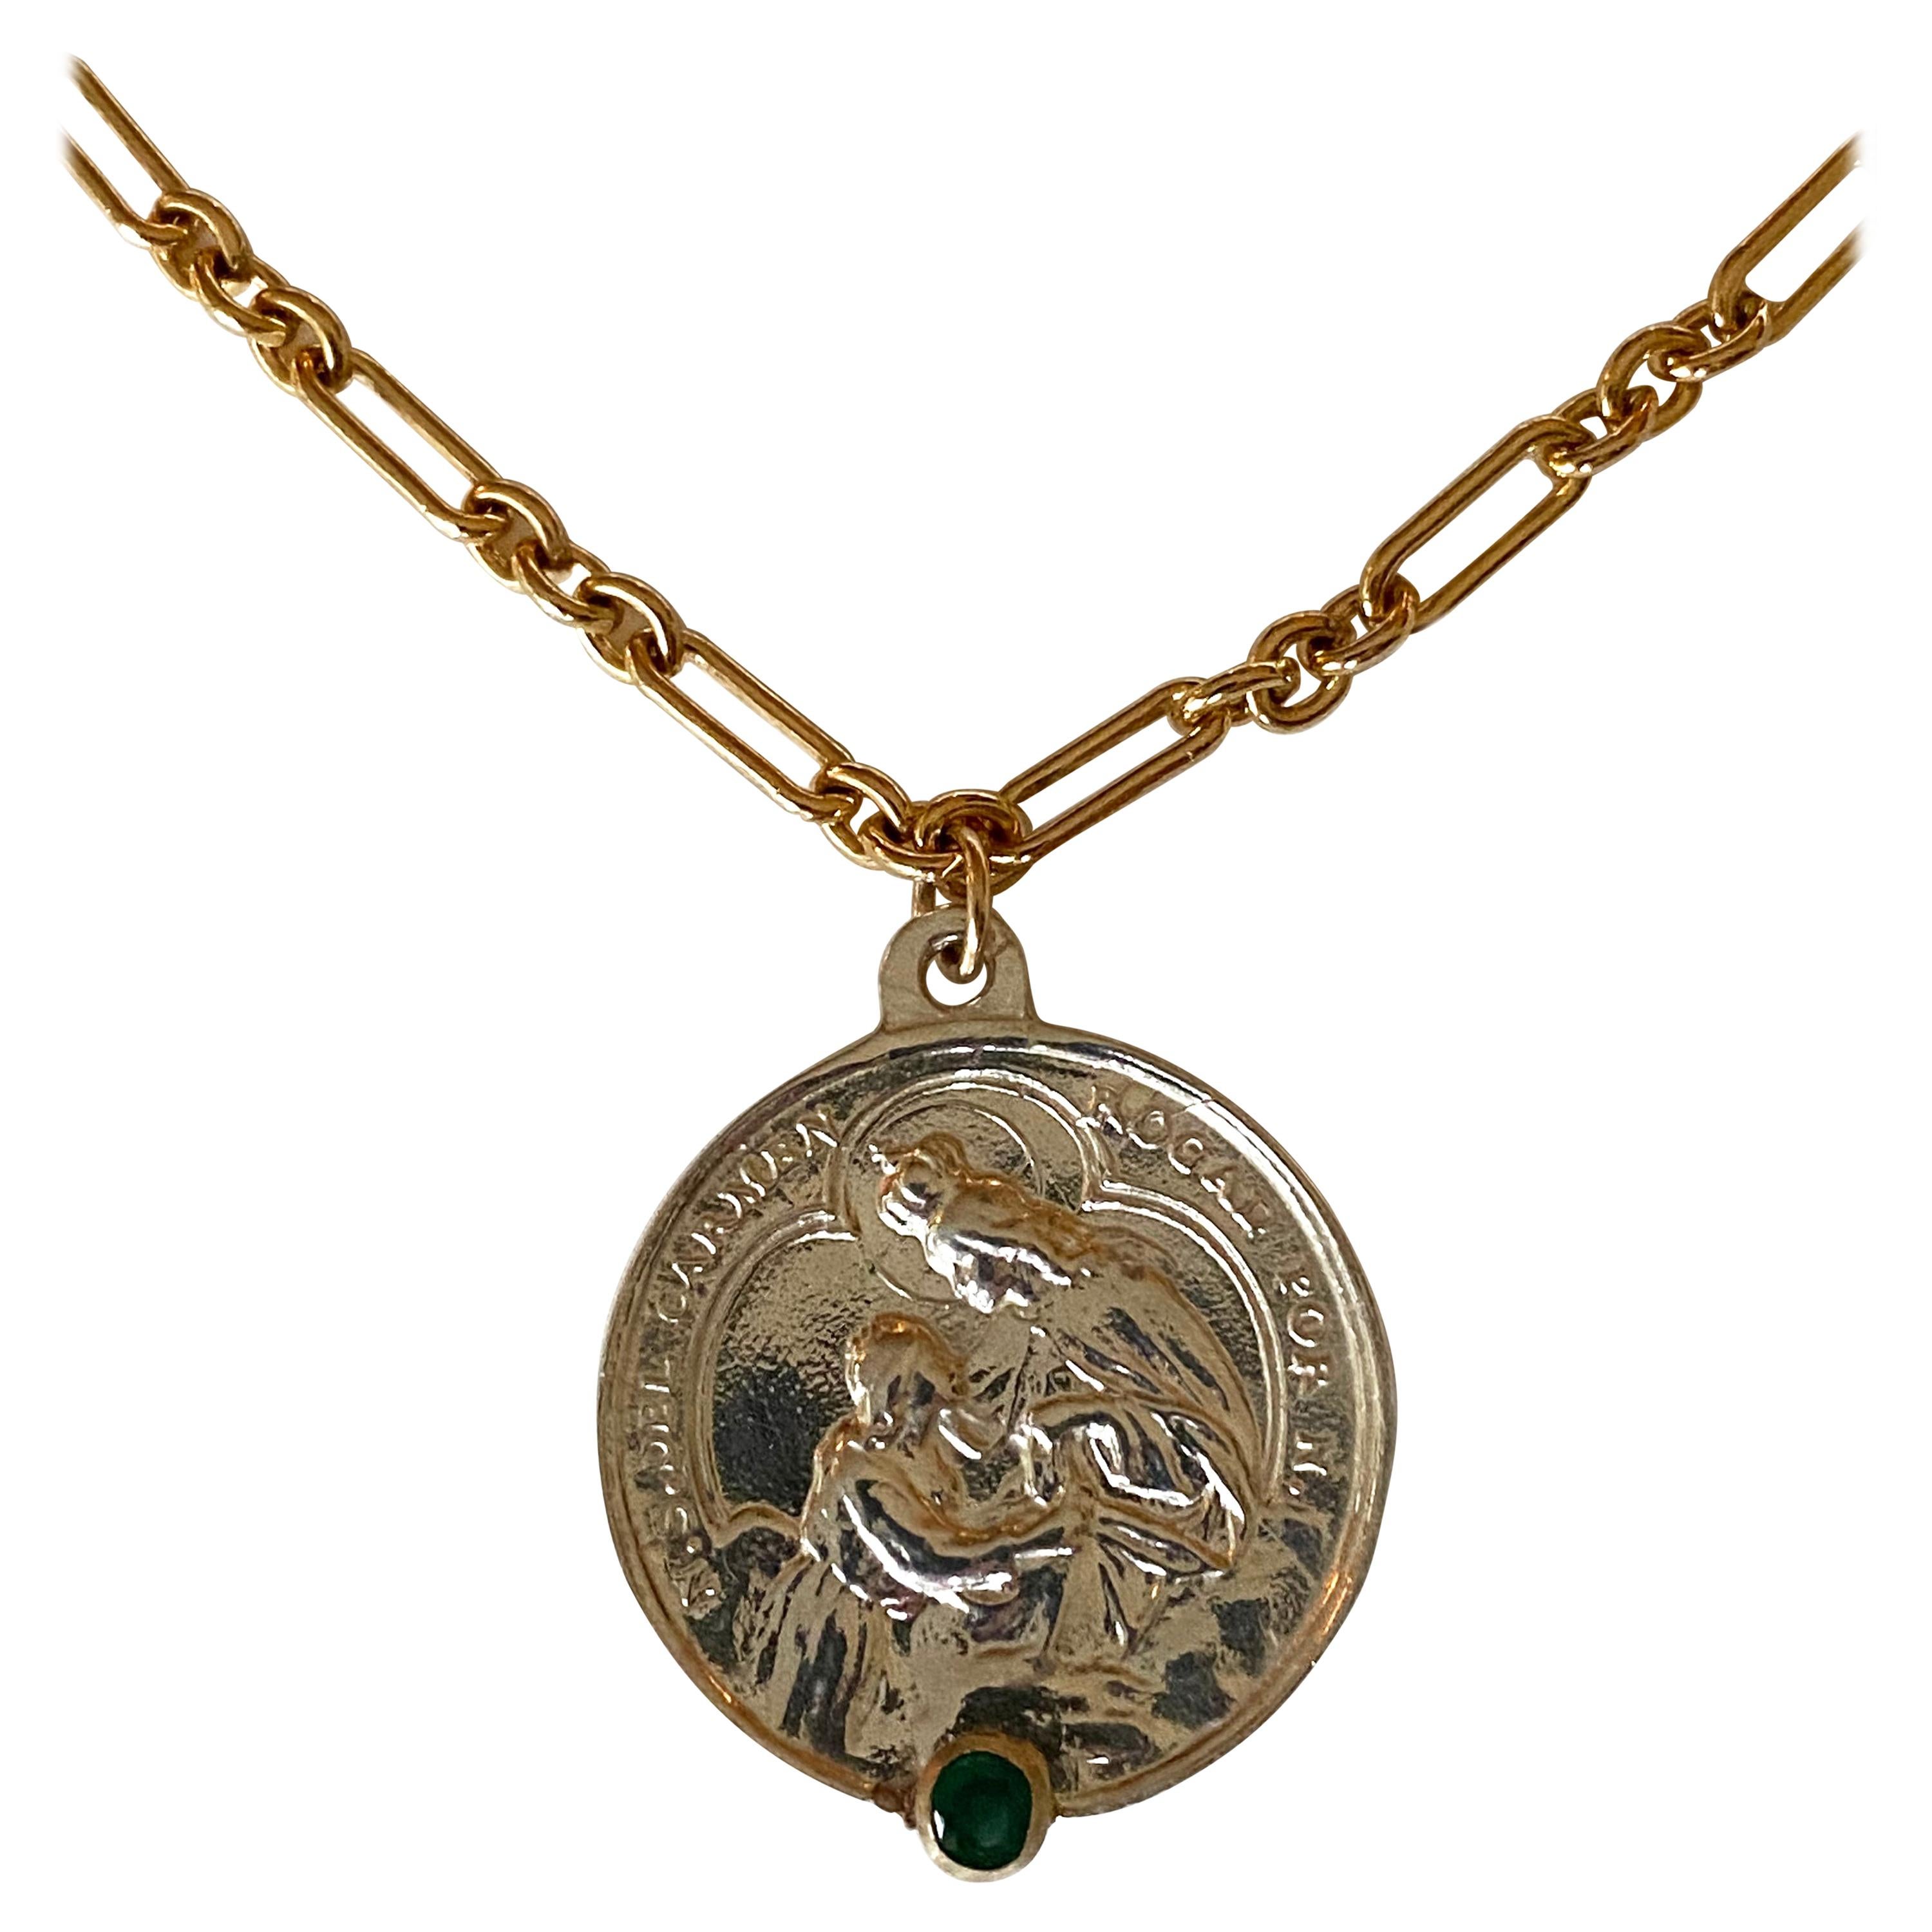 Medal Chain Necklace Emerald Virgin Mary Sterling Silver Chunky J Dauphin

Exclusive piece with a Round Virgin Mary Medal in Silver with an Emerald set in a Gold Prong prong and with a gold filled Chain. Necklace is 22